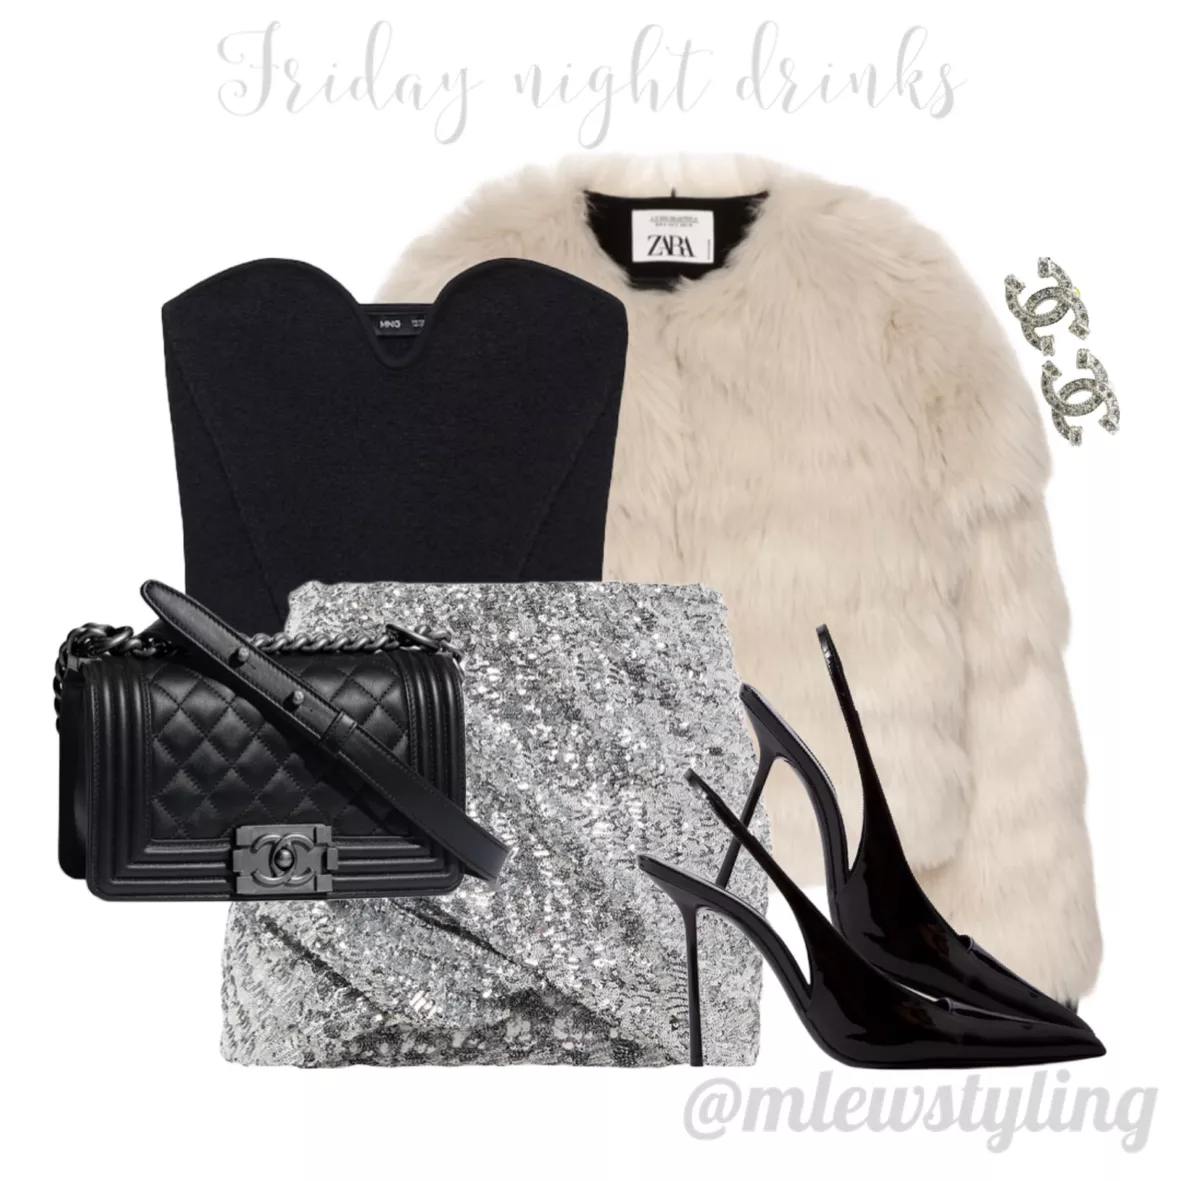 fakerstrom / minimal / outfit / black / white / YSL bag  Fashion, Winter  outfits dressy, London aesthetic outfits